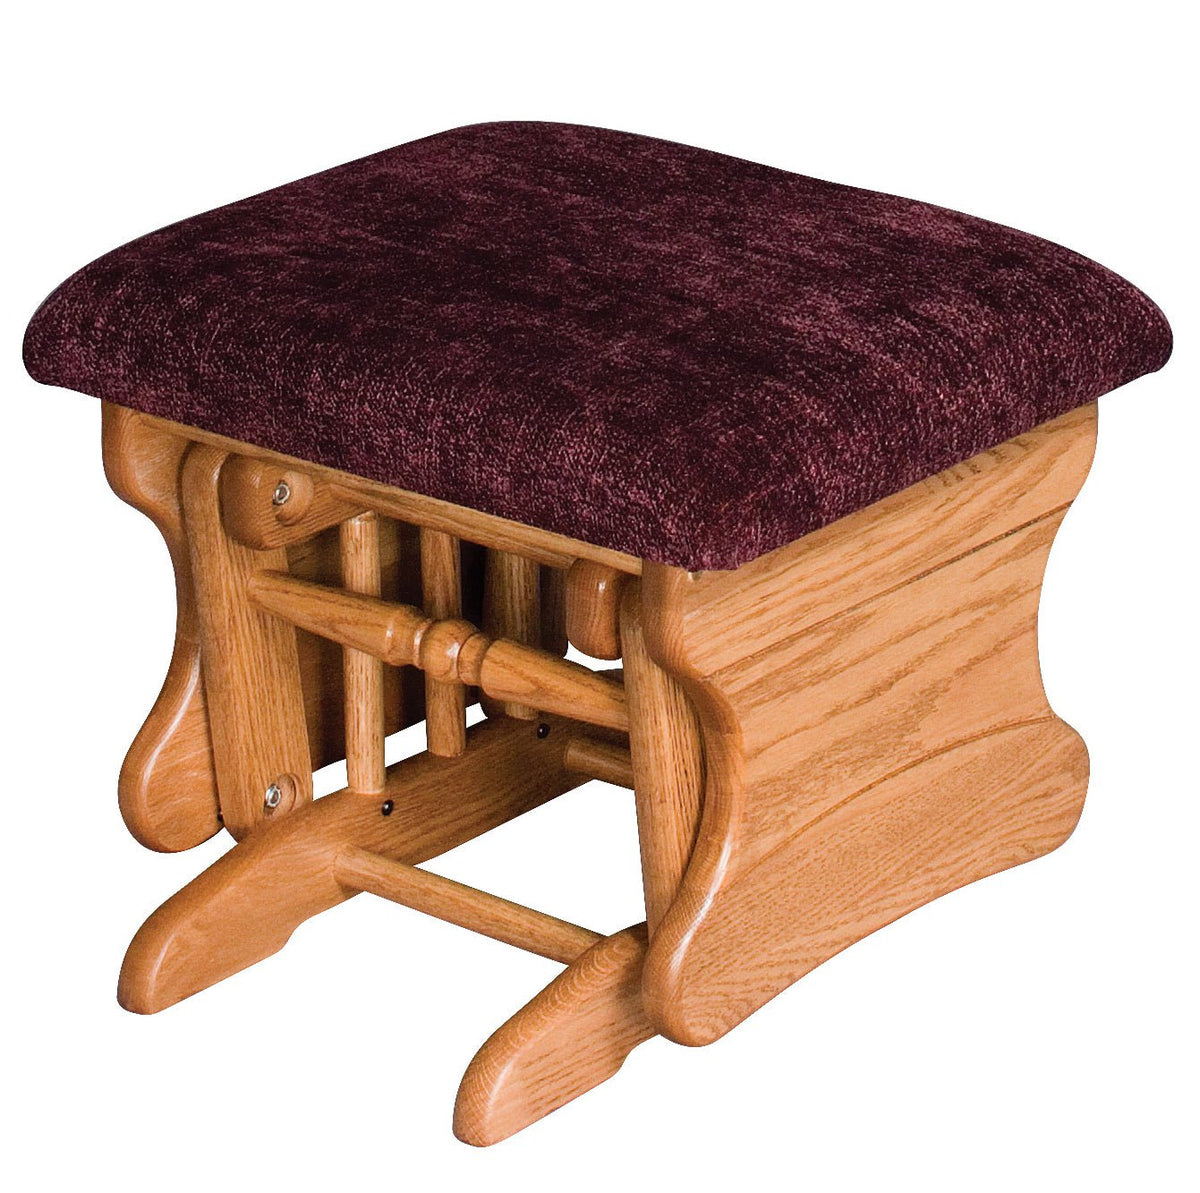 Wilton Rocking Footstool from DutchCrafters Amish Furniture